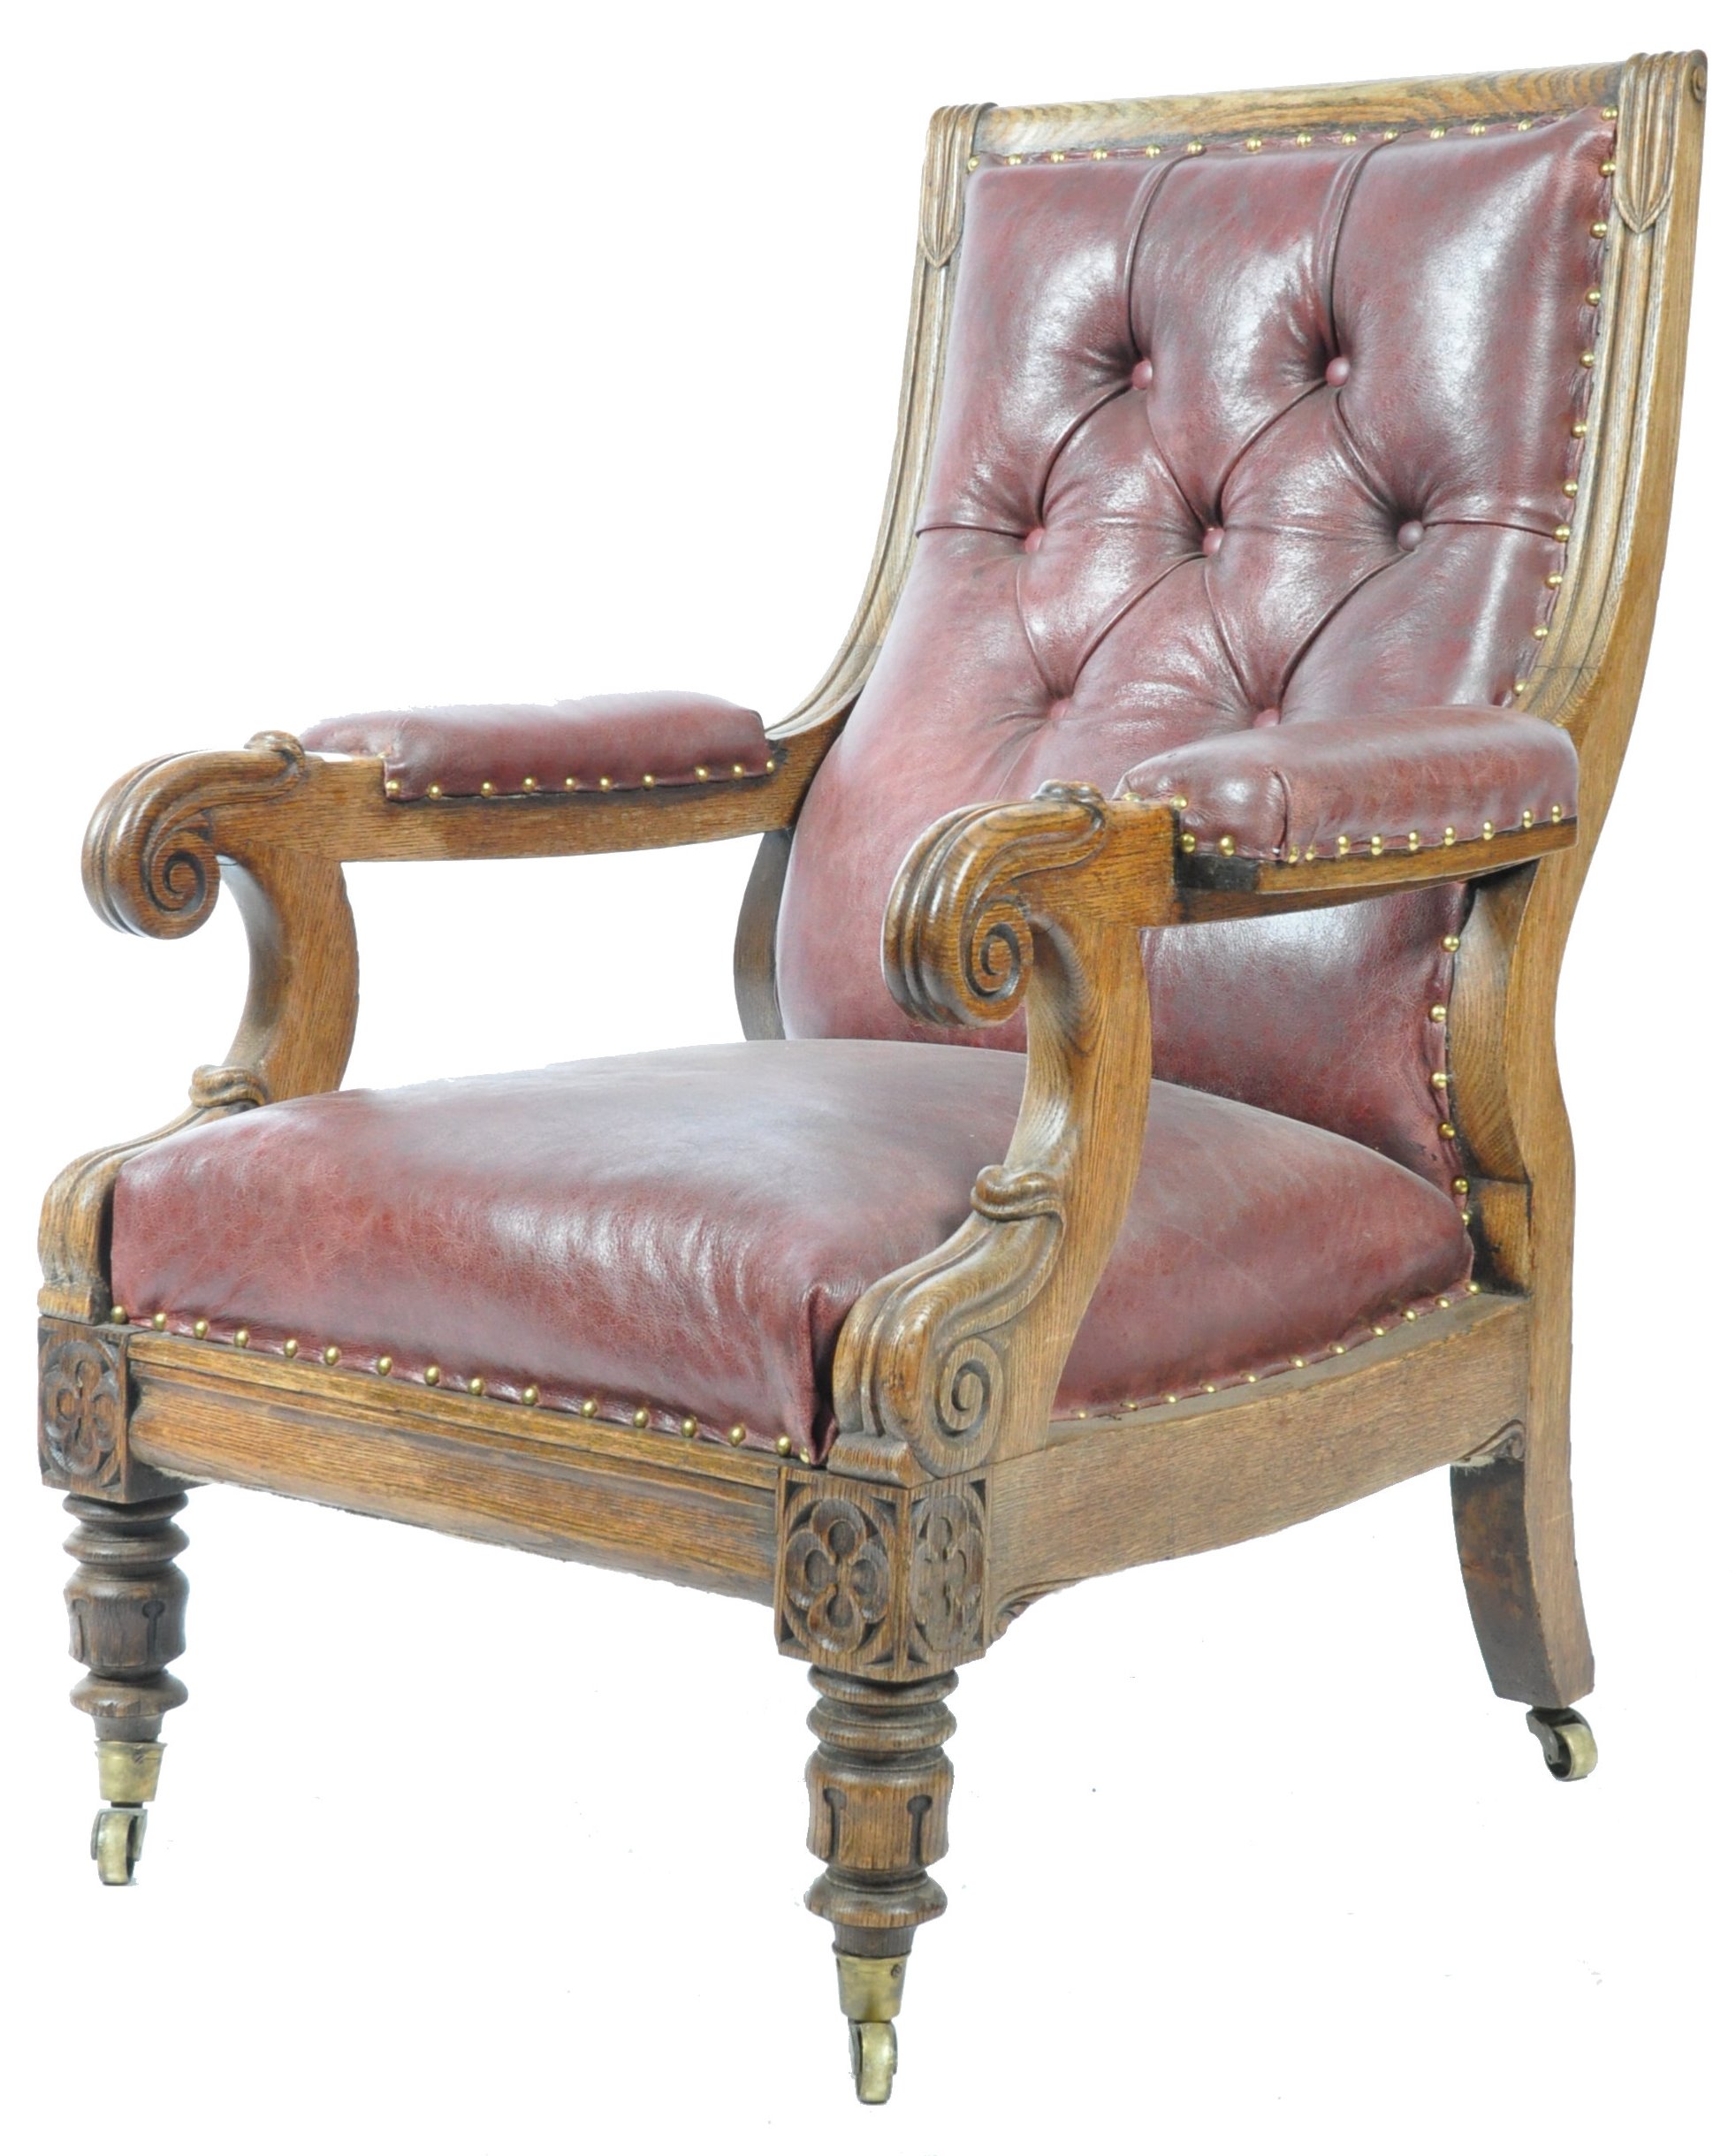 WILLIAM IV ENGLISH CARVED OAK AND LEATHER UPHOLSTERED LIBRARY CHAIR